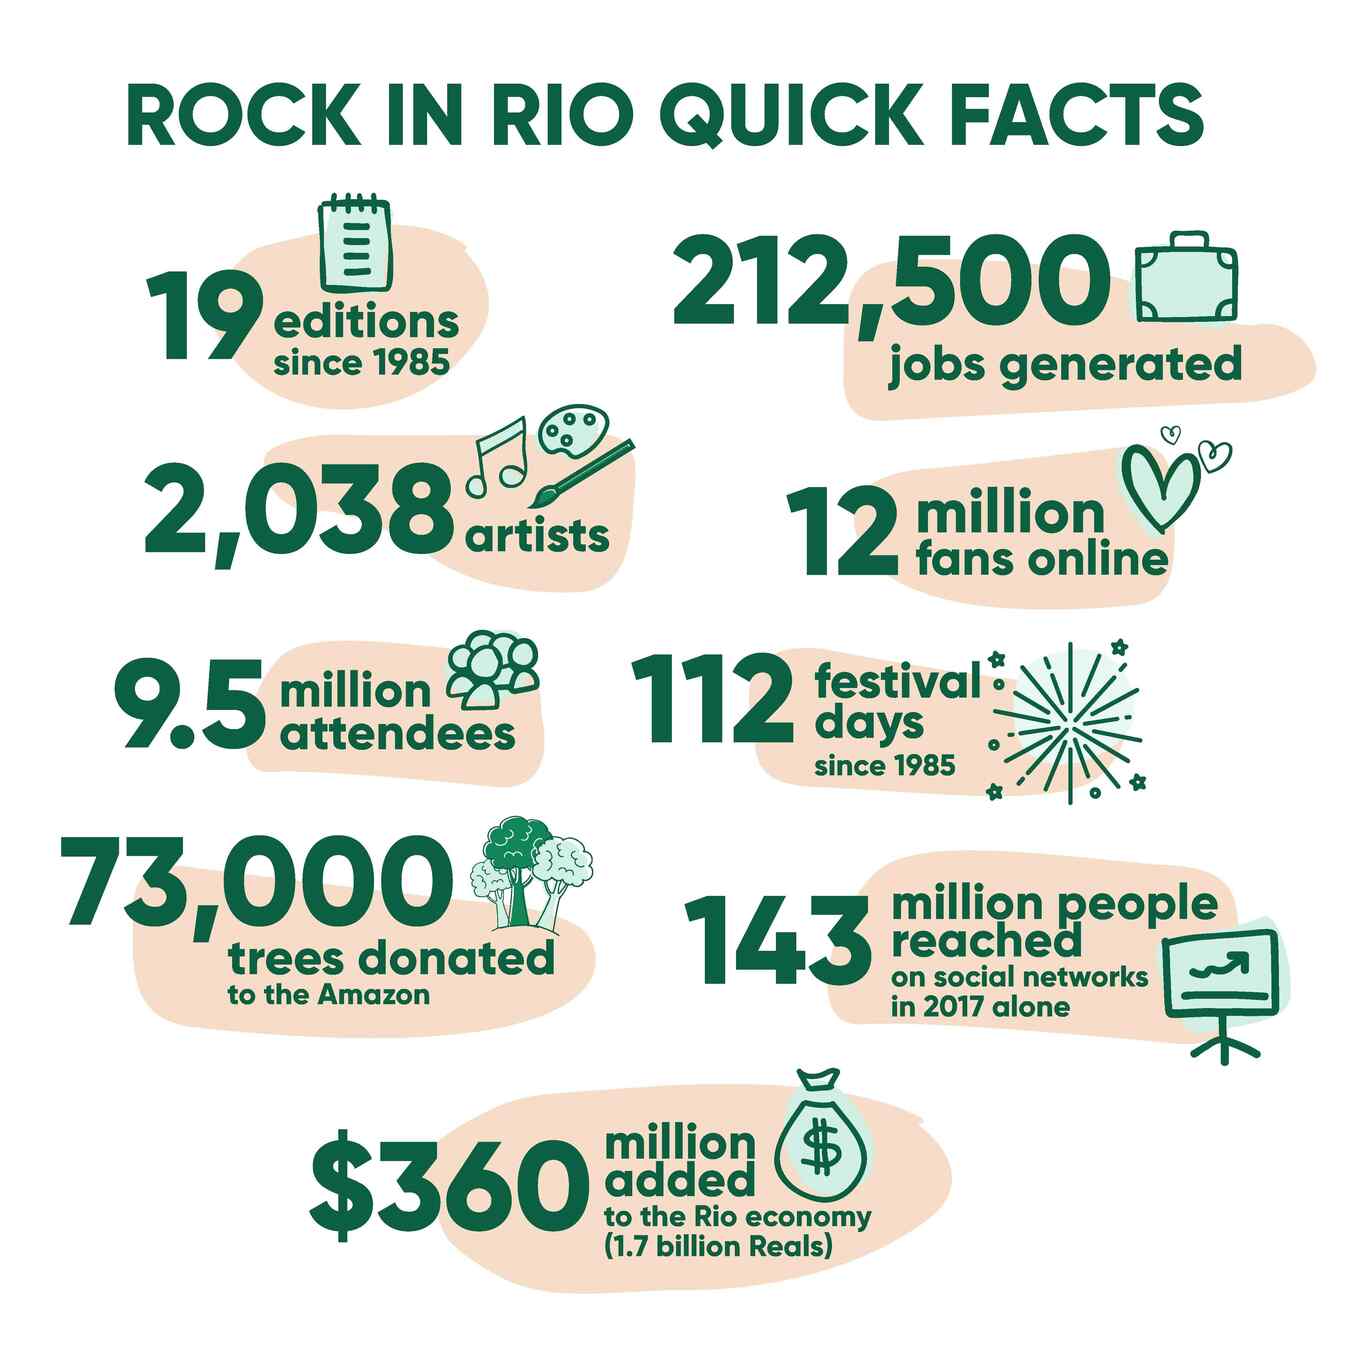 Several facts about Rock in Rio: Attendance, artists, jobs generated & more